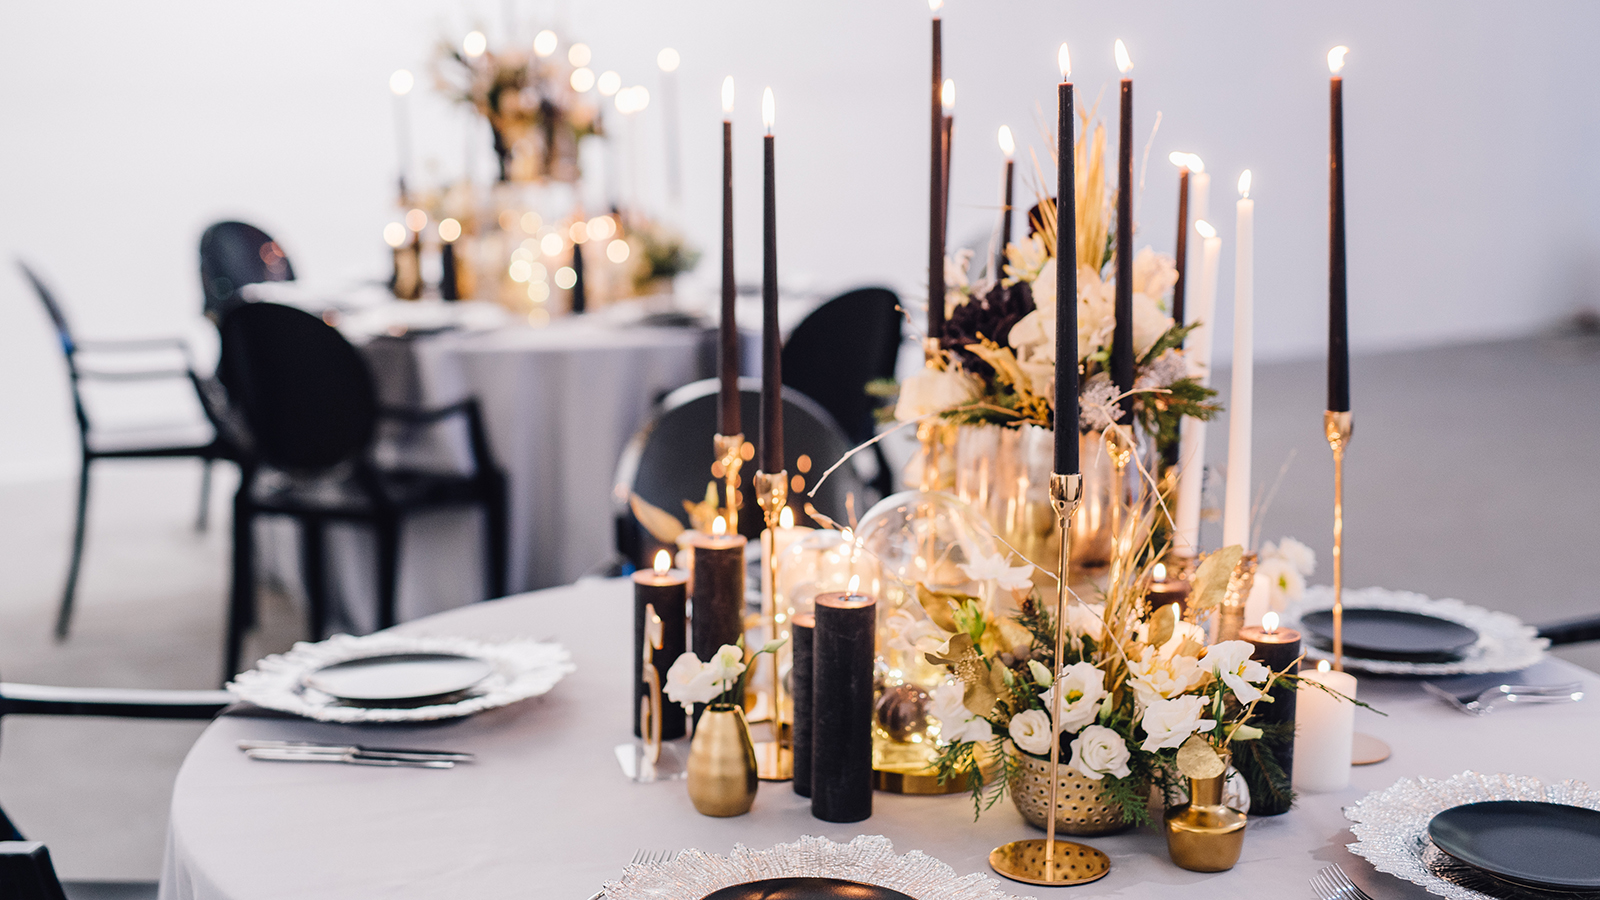 Black candles on candlesticks with flowers in vases on reception table. Wedding. Decor